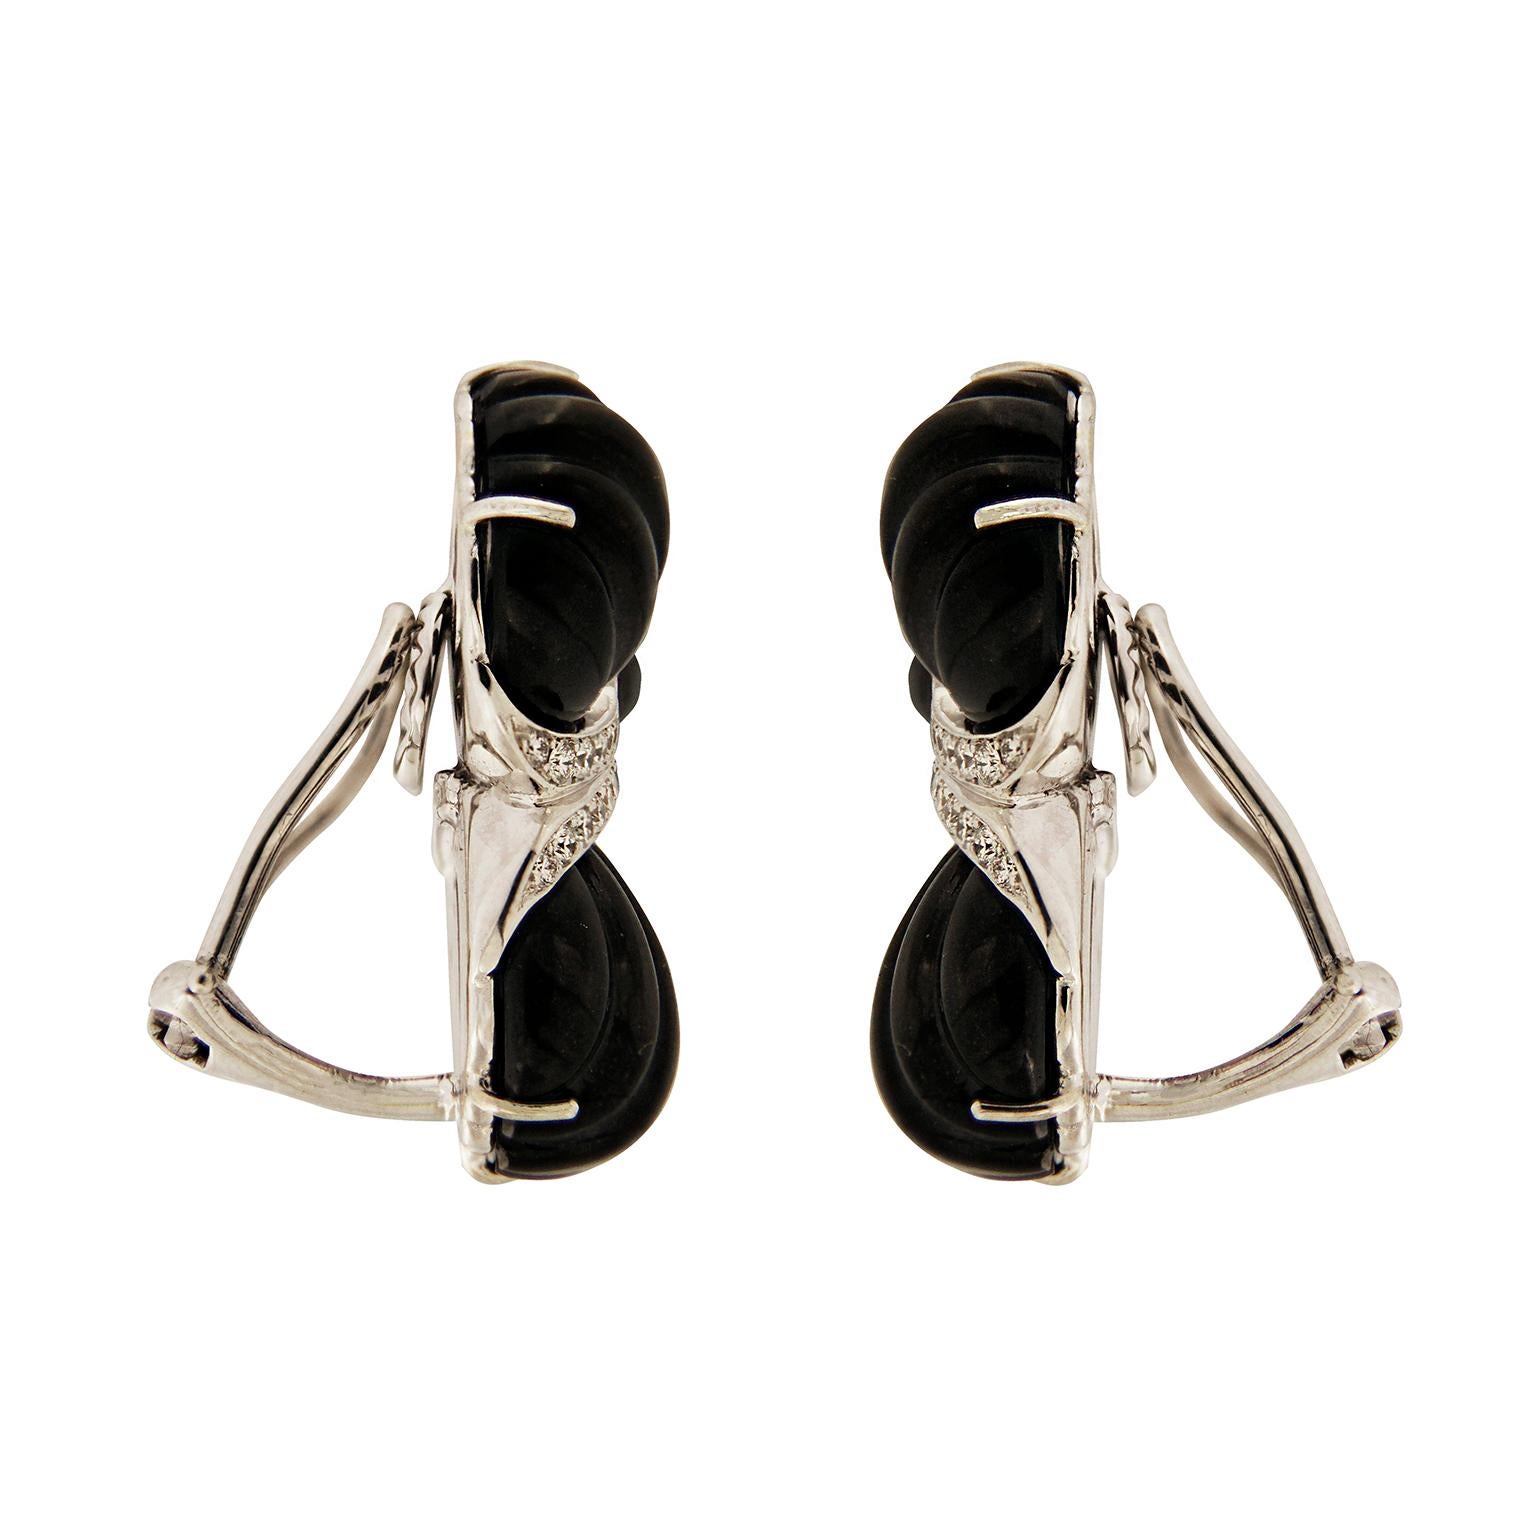 Valentin Magro Black Jade Diamond Triple Fan Earrings form a striking color combination. Black jade is carved into fluted fans. Their bottom edges adorned with white round brilliant cut diamonds. The jewels come together with diamonds in the middle